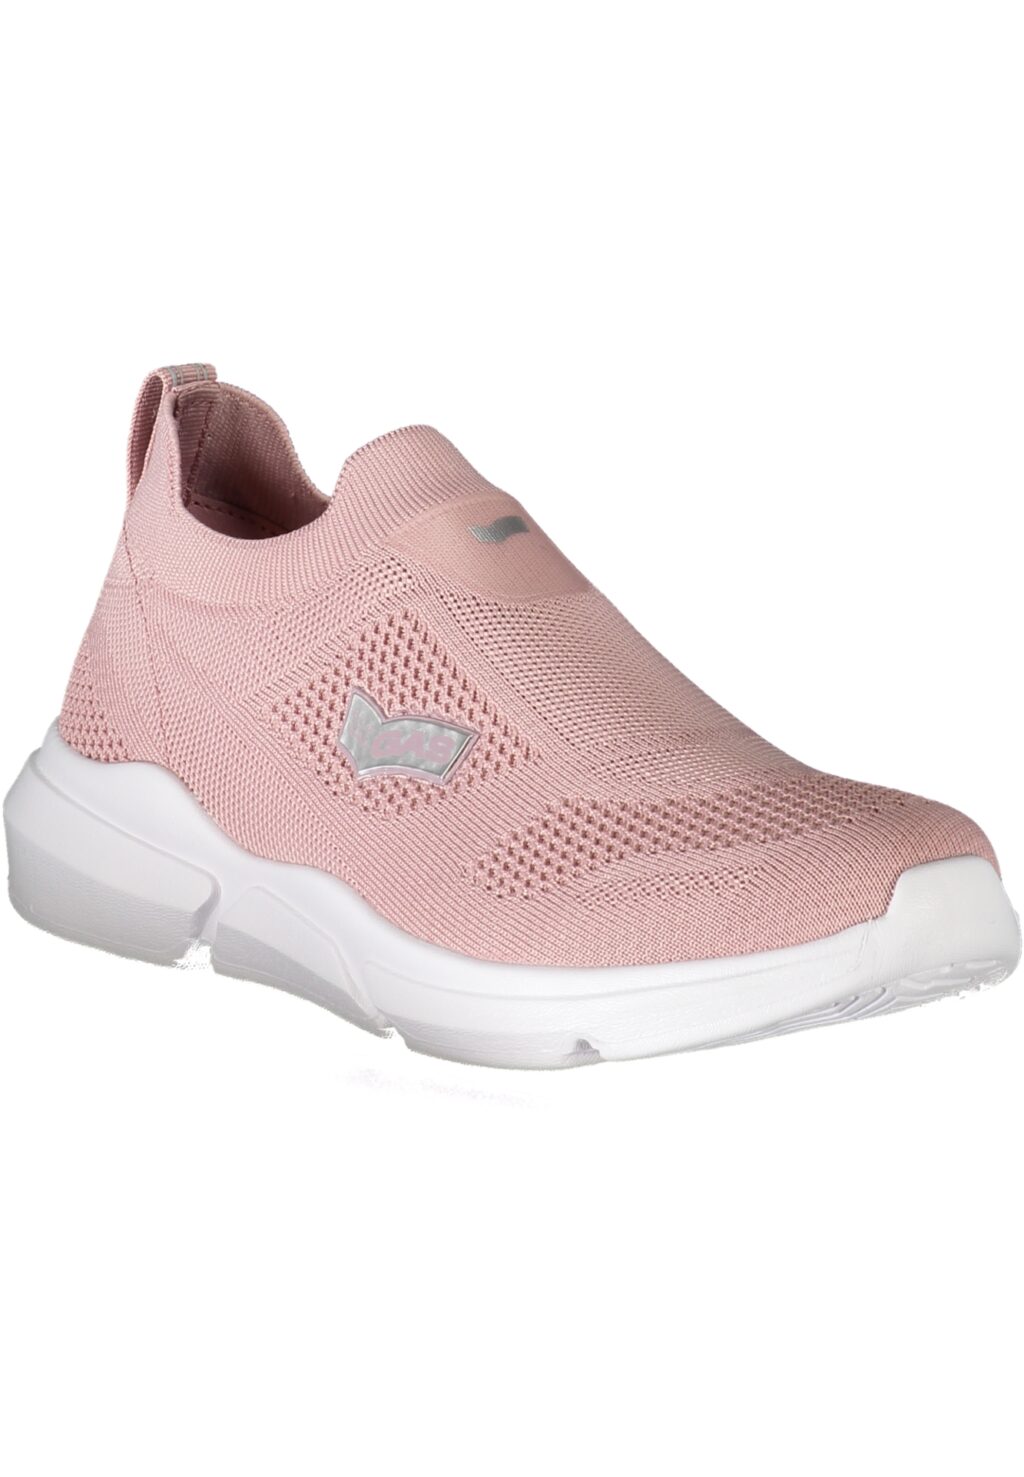 GAS PINK WOMEN'S SPORTS SHOES GAW417505_RS0044